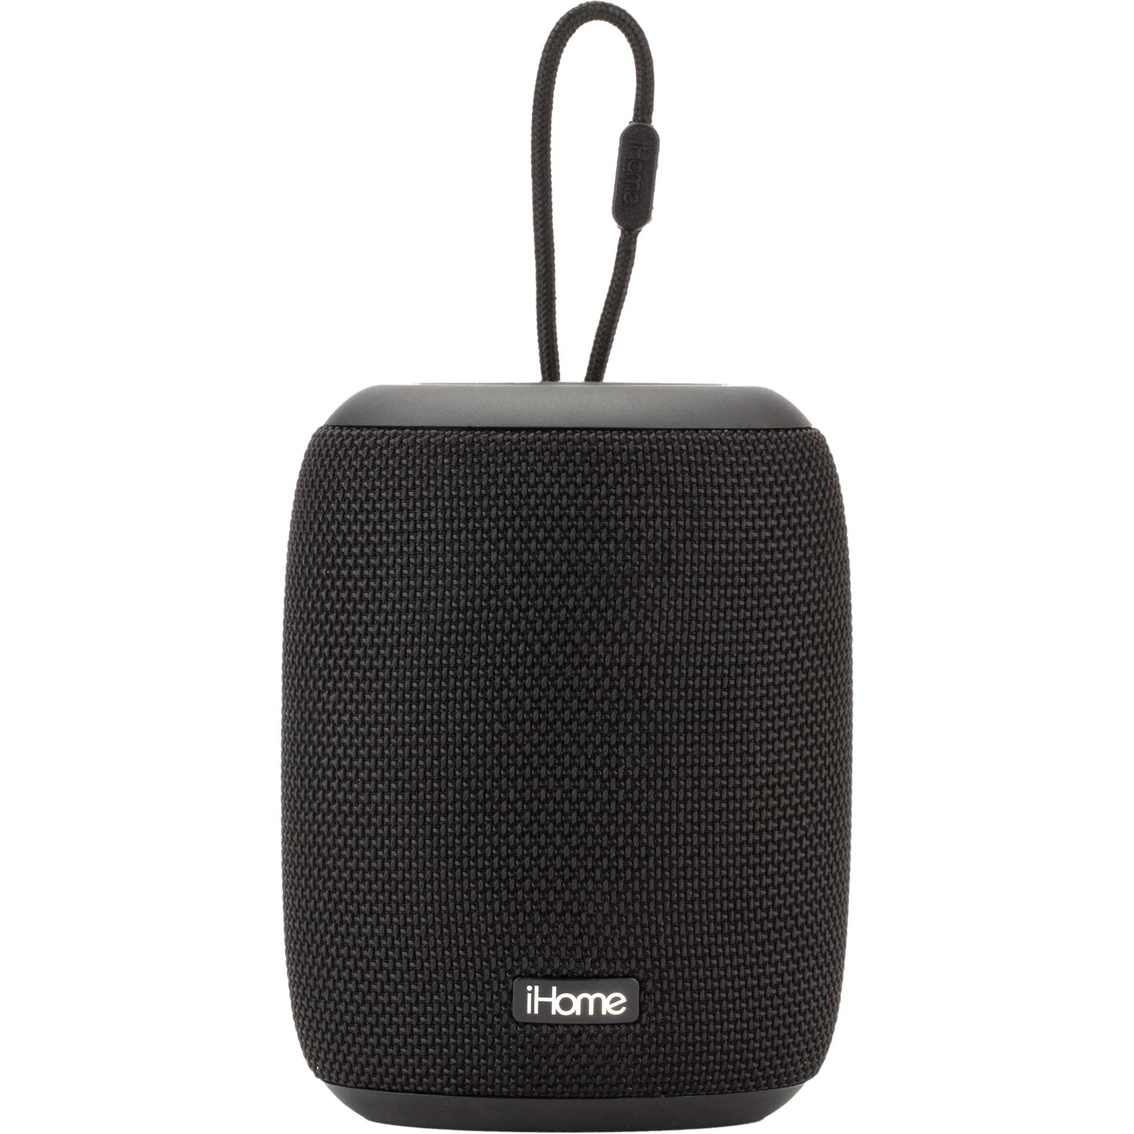 iHome PlayPro Rechargeable Waterproof Bluetooth Speaker System with Mega Battery - Image 4 of 8